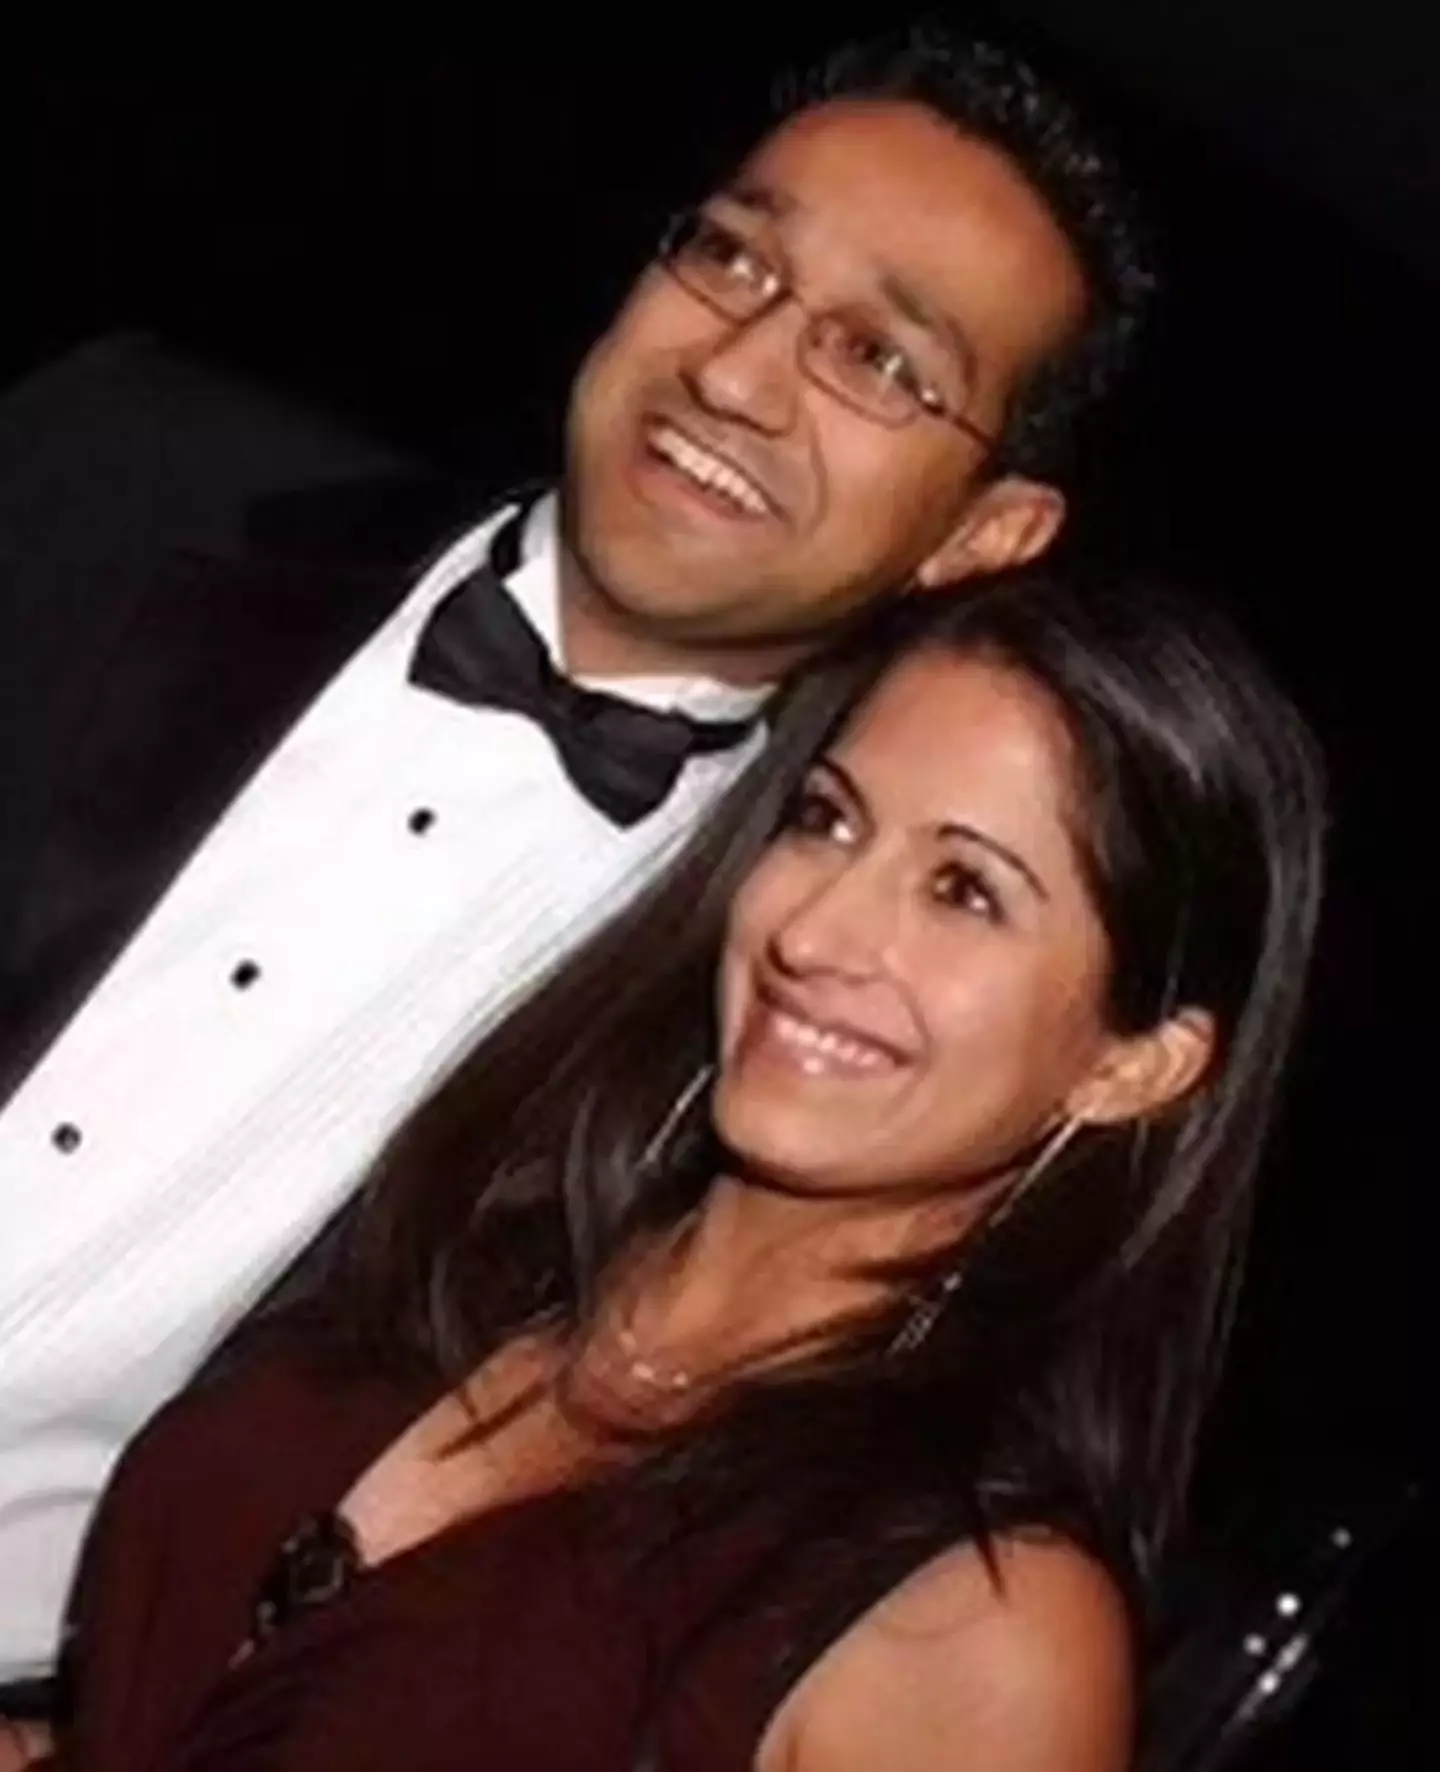 Dr Shivani Tanna claimed that one doctor treating her husband 'had never heard of HLH'.